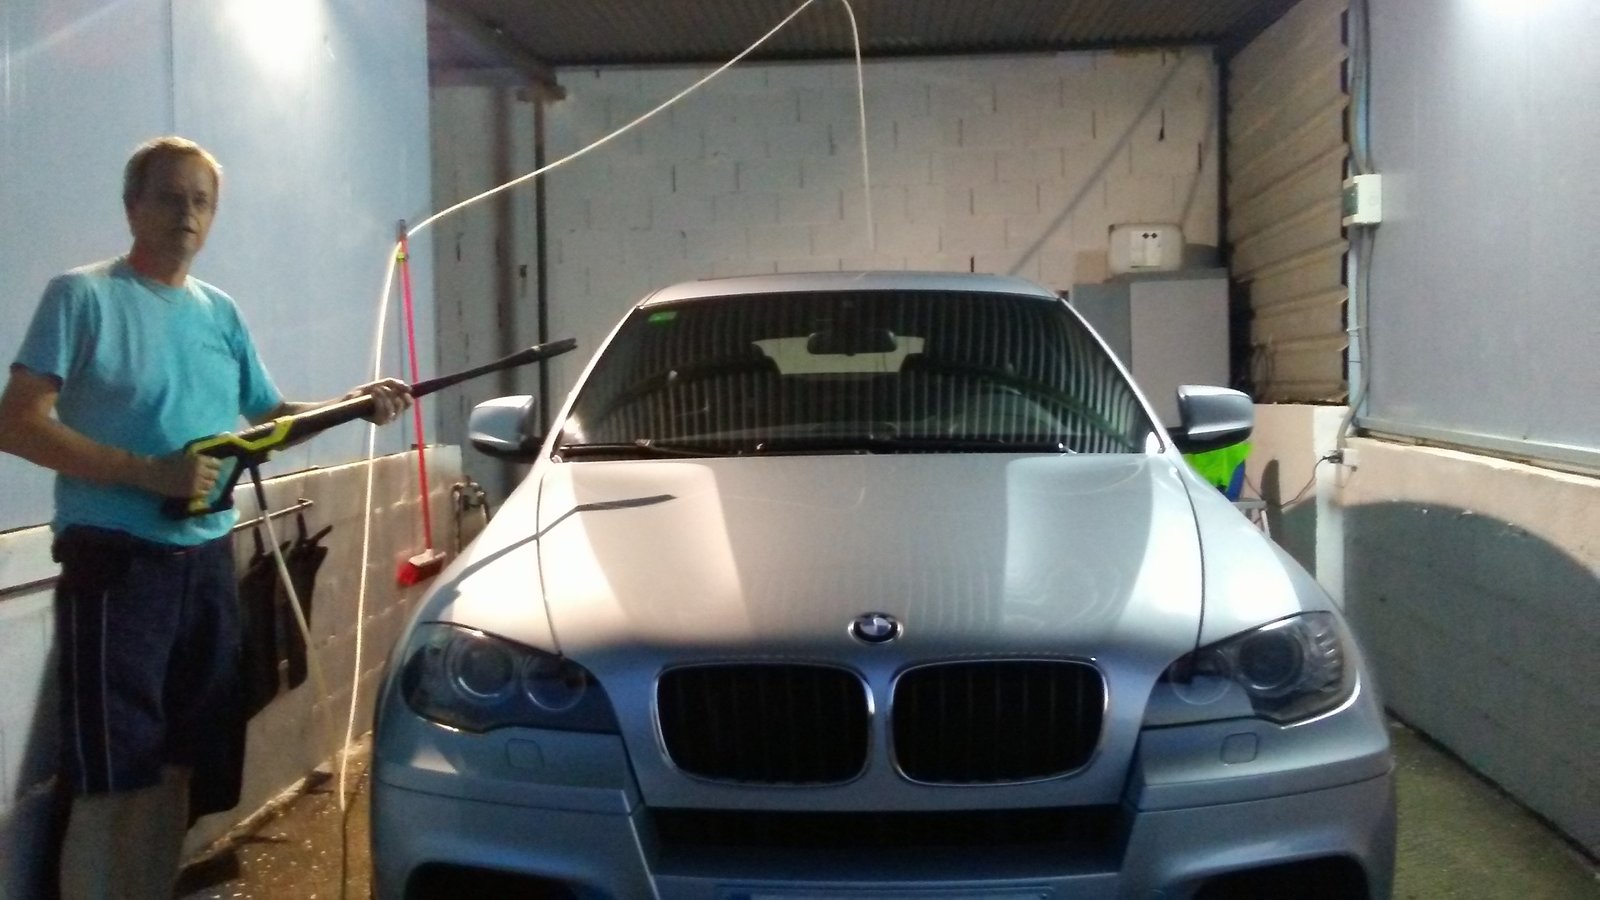 Here we are preparing a private vehicle for delivery with an exterior wash by hand.